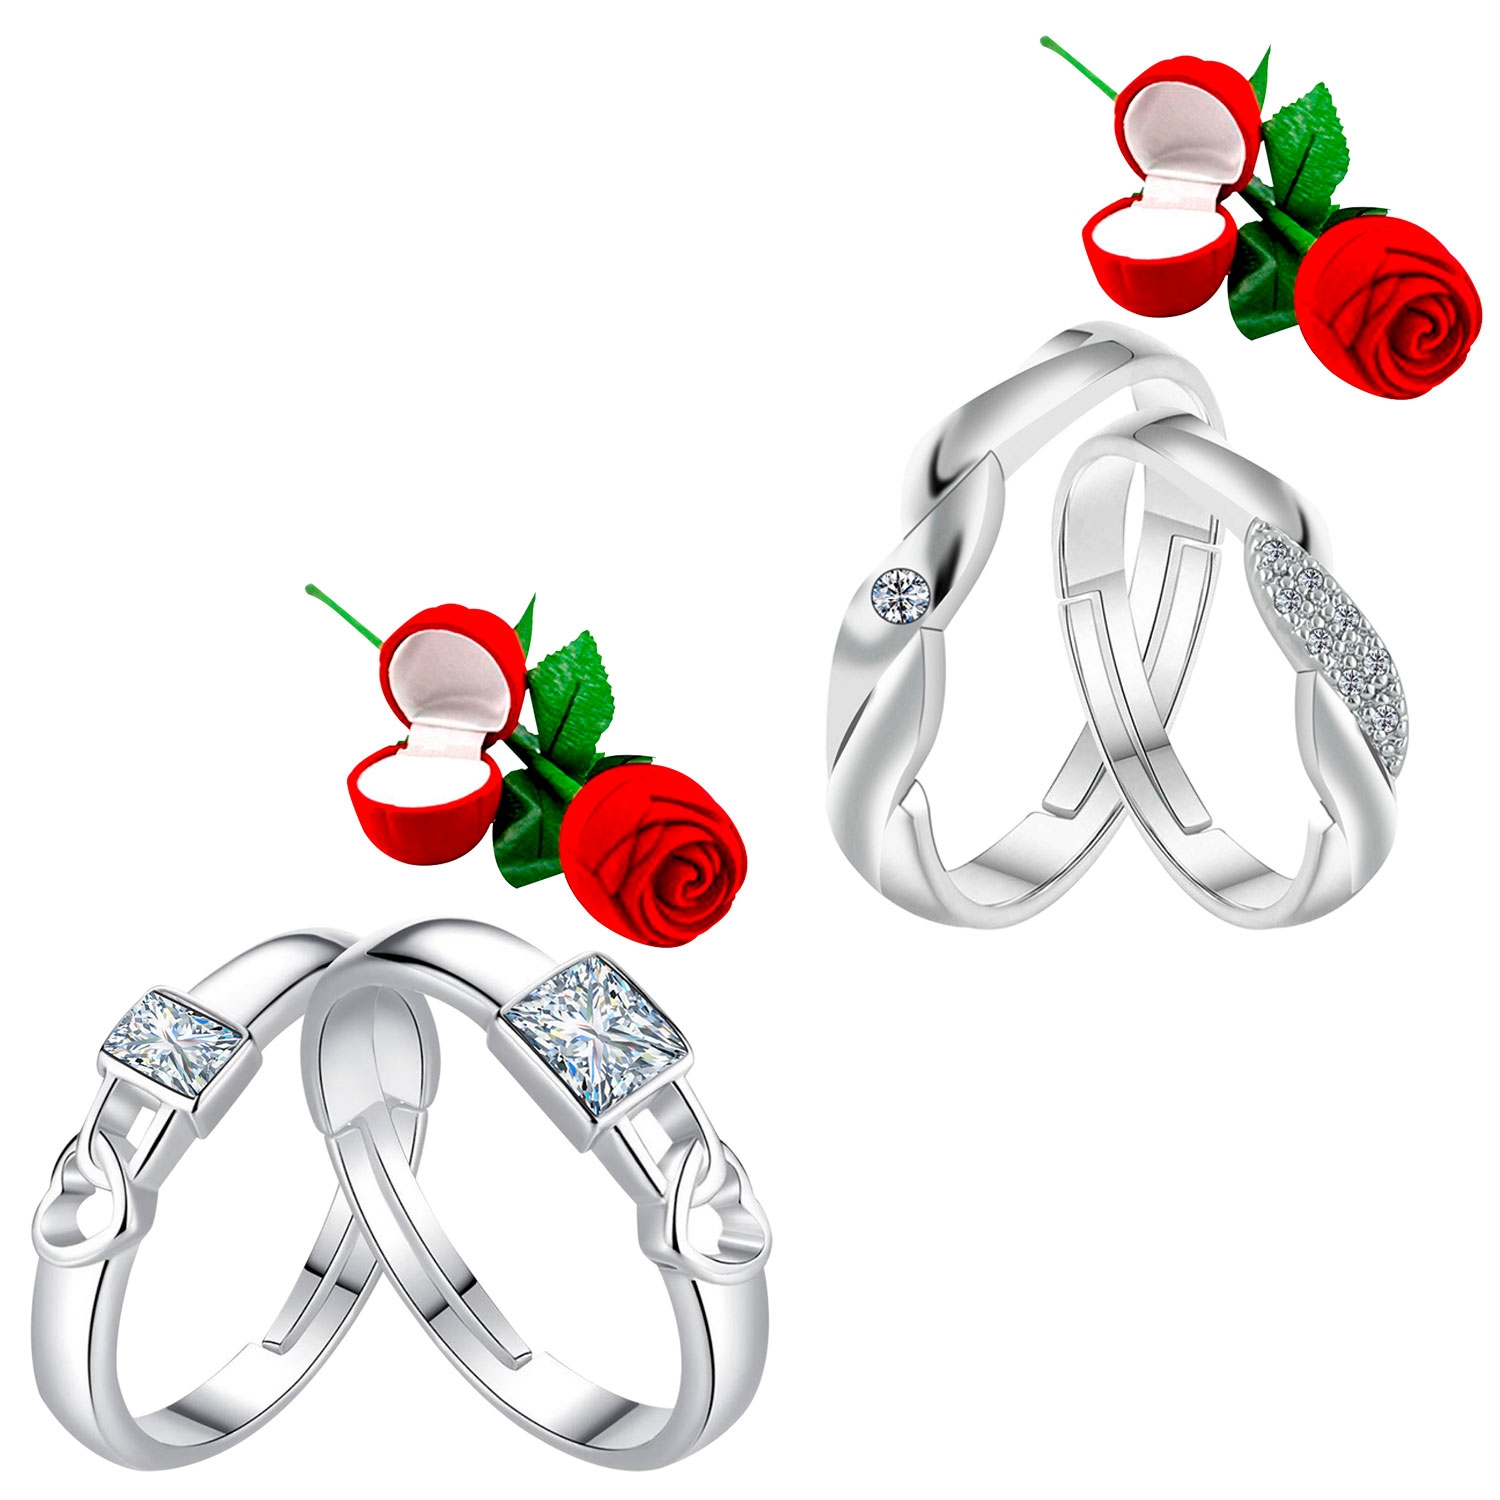 SILVER SHINE |  Adjustable Stylish Couple Rings Set for lovers with 2 Piece Red Rose Gift Box Silver Plated Stylish Ring for Men and Women  0